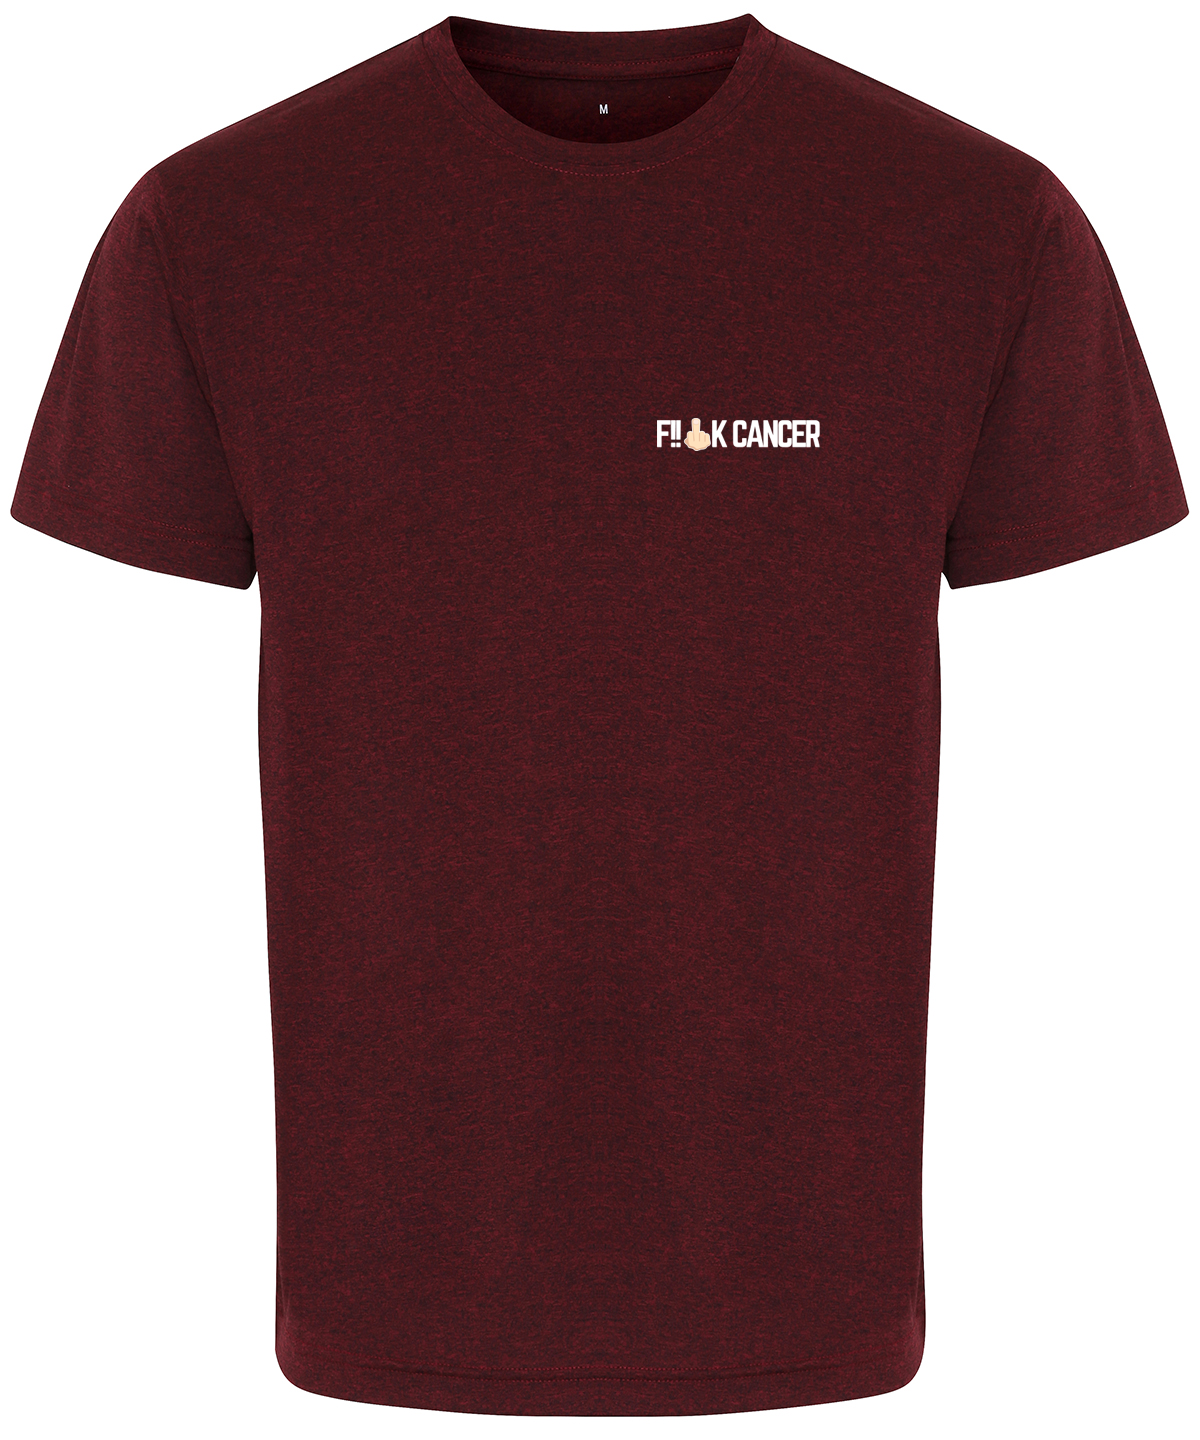 F!!CK CANCER Technical Tee (Unisex)-£2 donated to Cancer Research